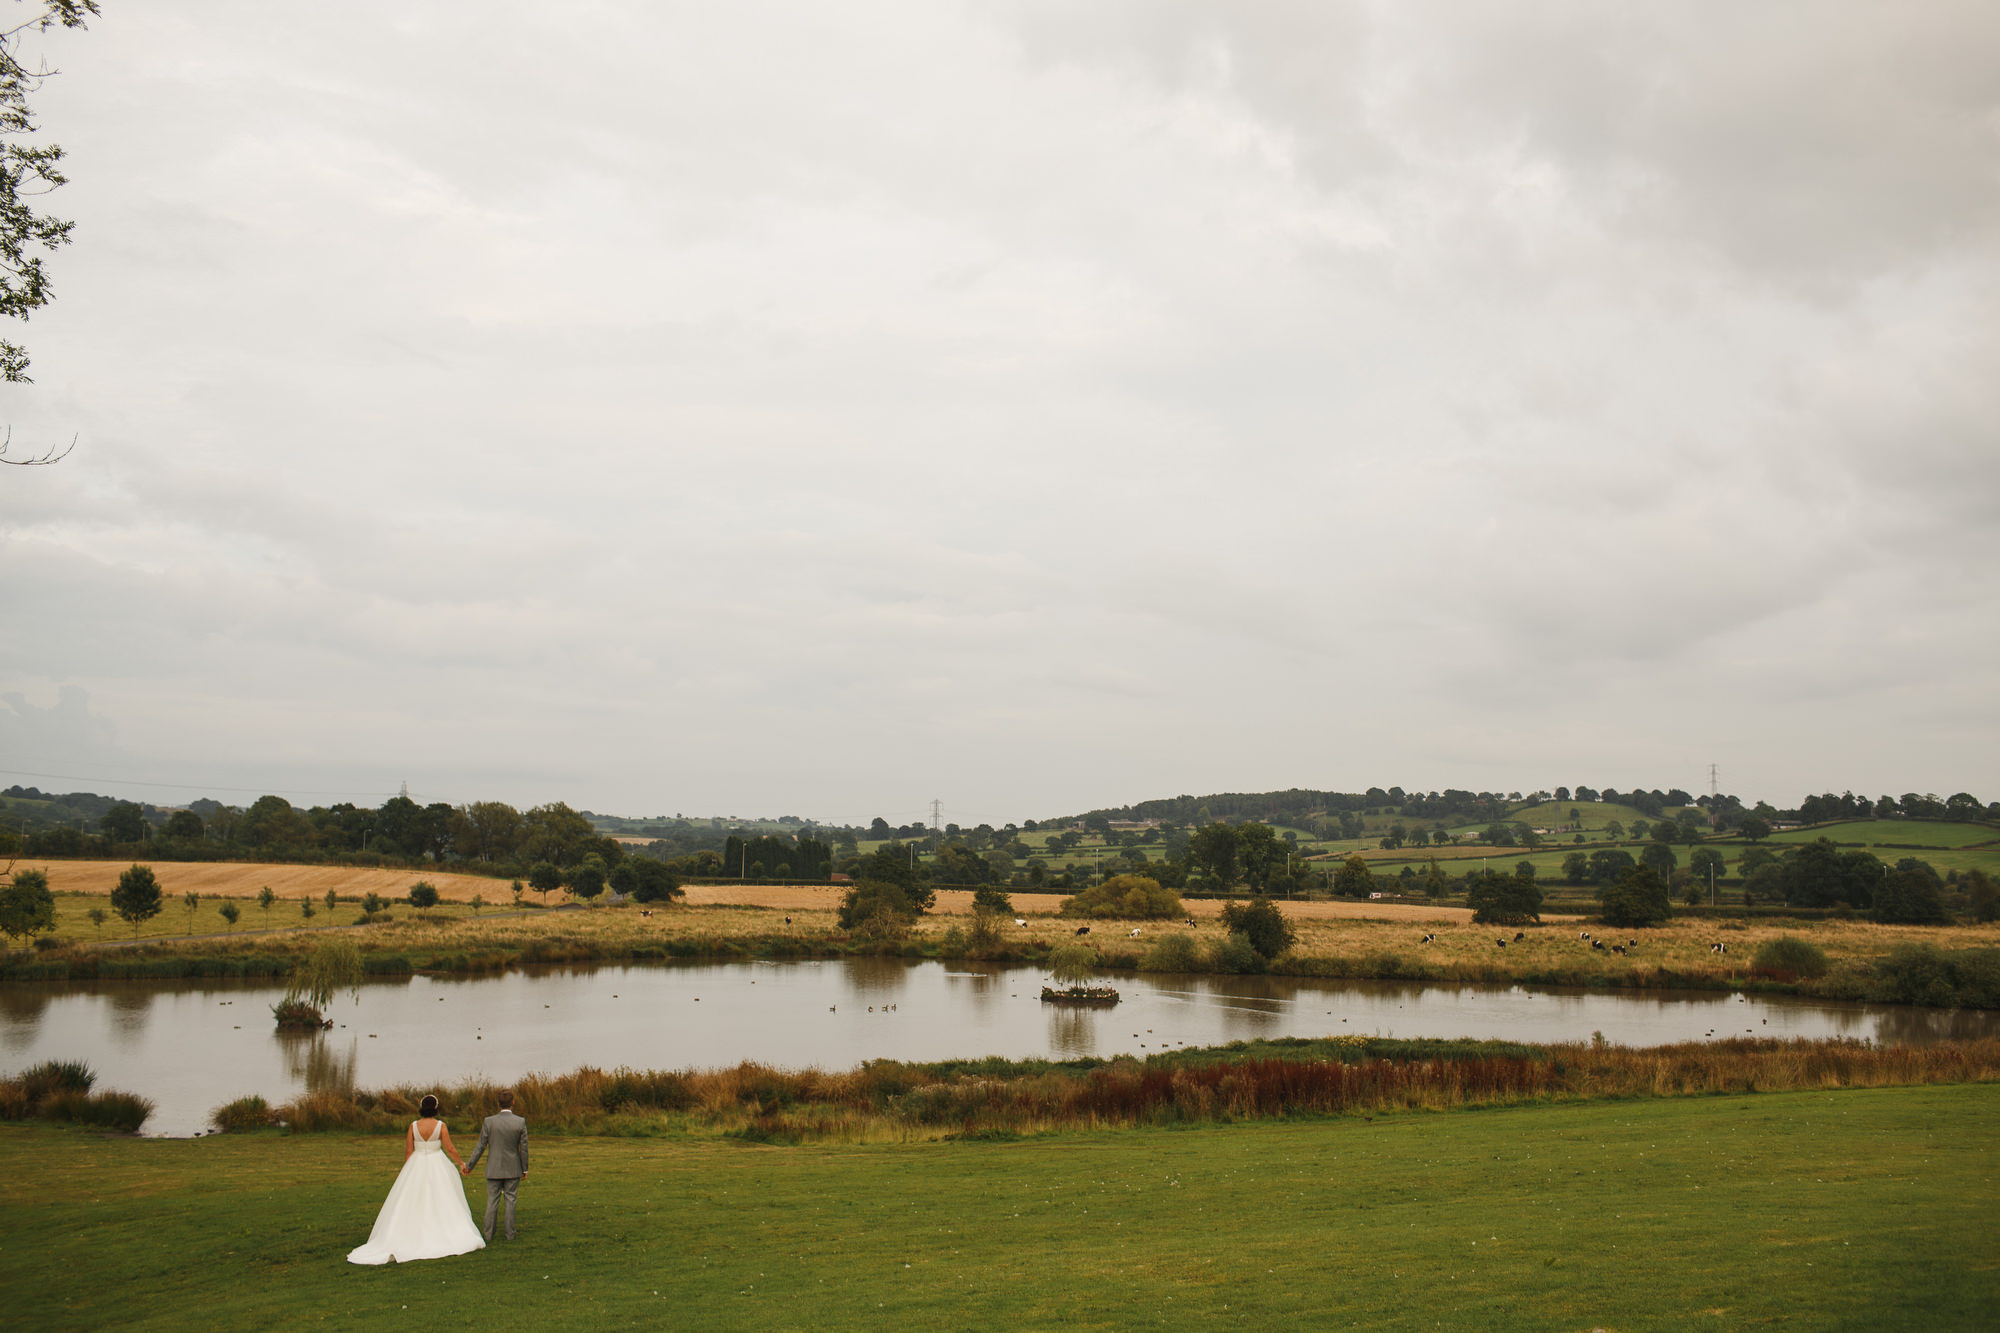 The ashes endon wedding photography staffordshire